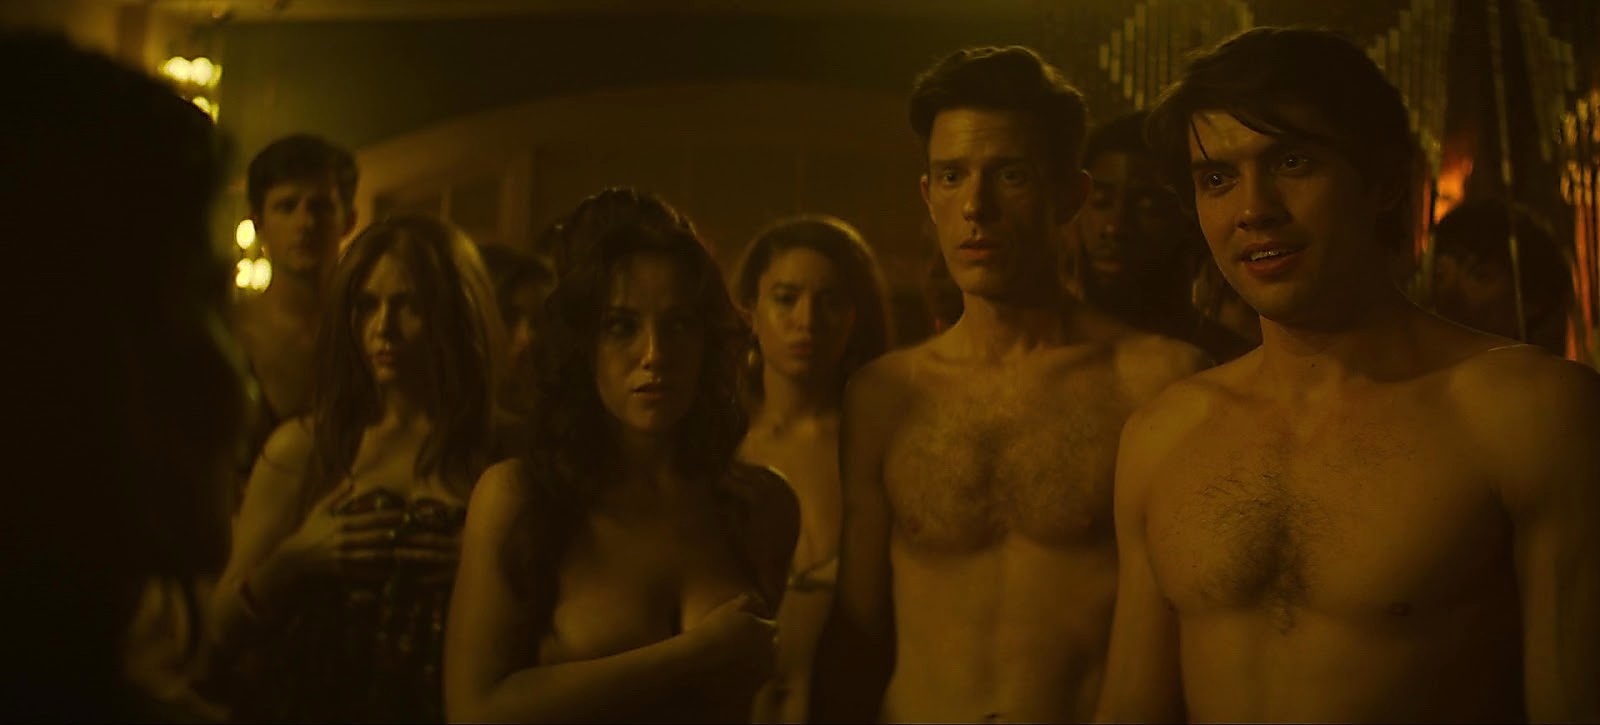 Carter Jenkins sexy shirtless scene August 7, 2020, 3pm